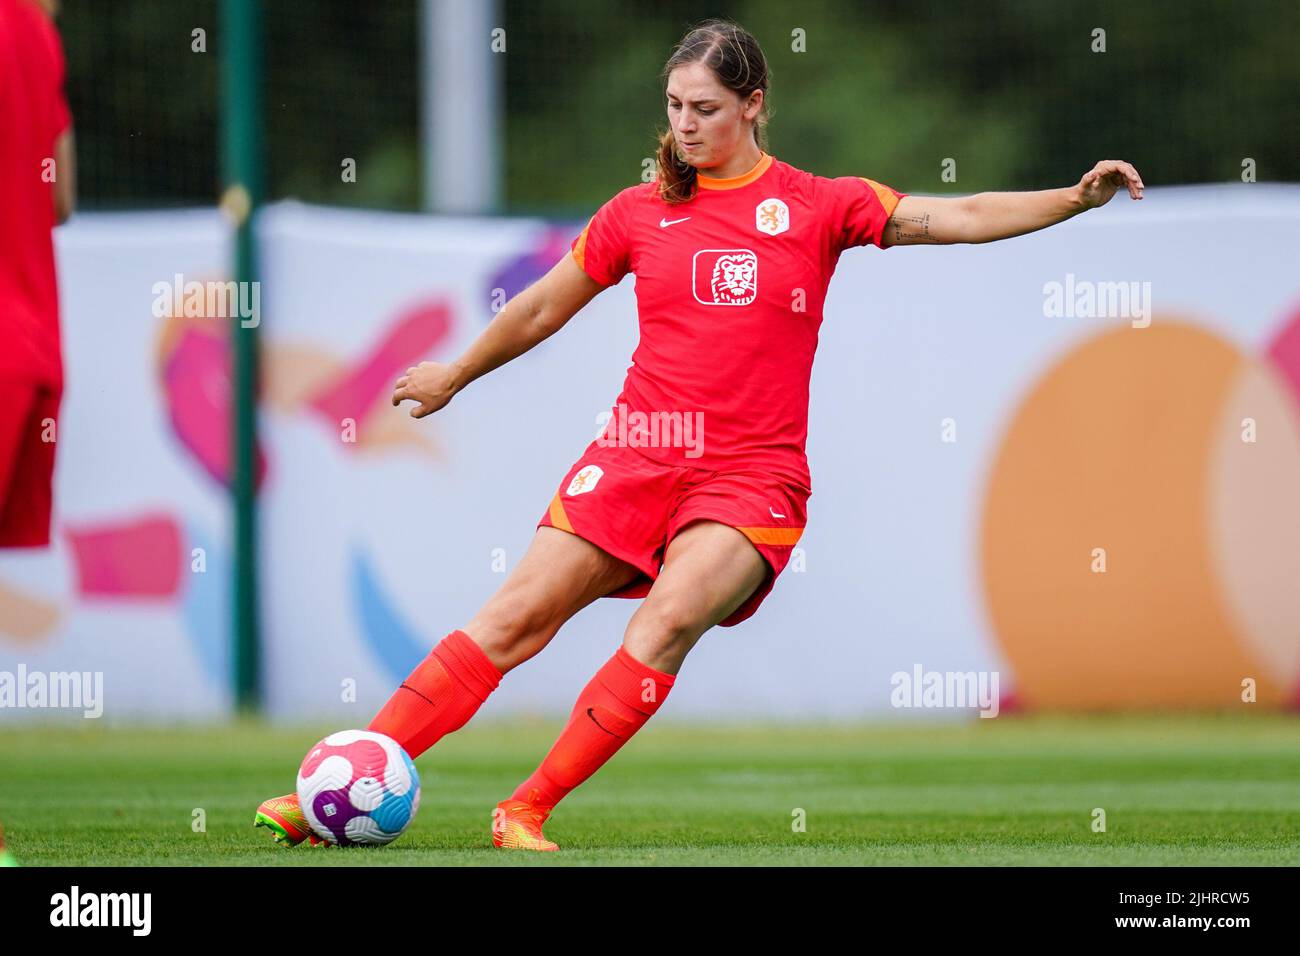 STOCKPORT, UNITED KINGDOM - JULY 20: Aniek Nouwen of the Netherlands during a Training Session of Netherlands Women at Stockport County Training Centre on July 20, 2022 in Stockport, United Kingdom. (Photo by Joris Verwijst/Orange Pictures) Stock Photo